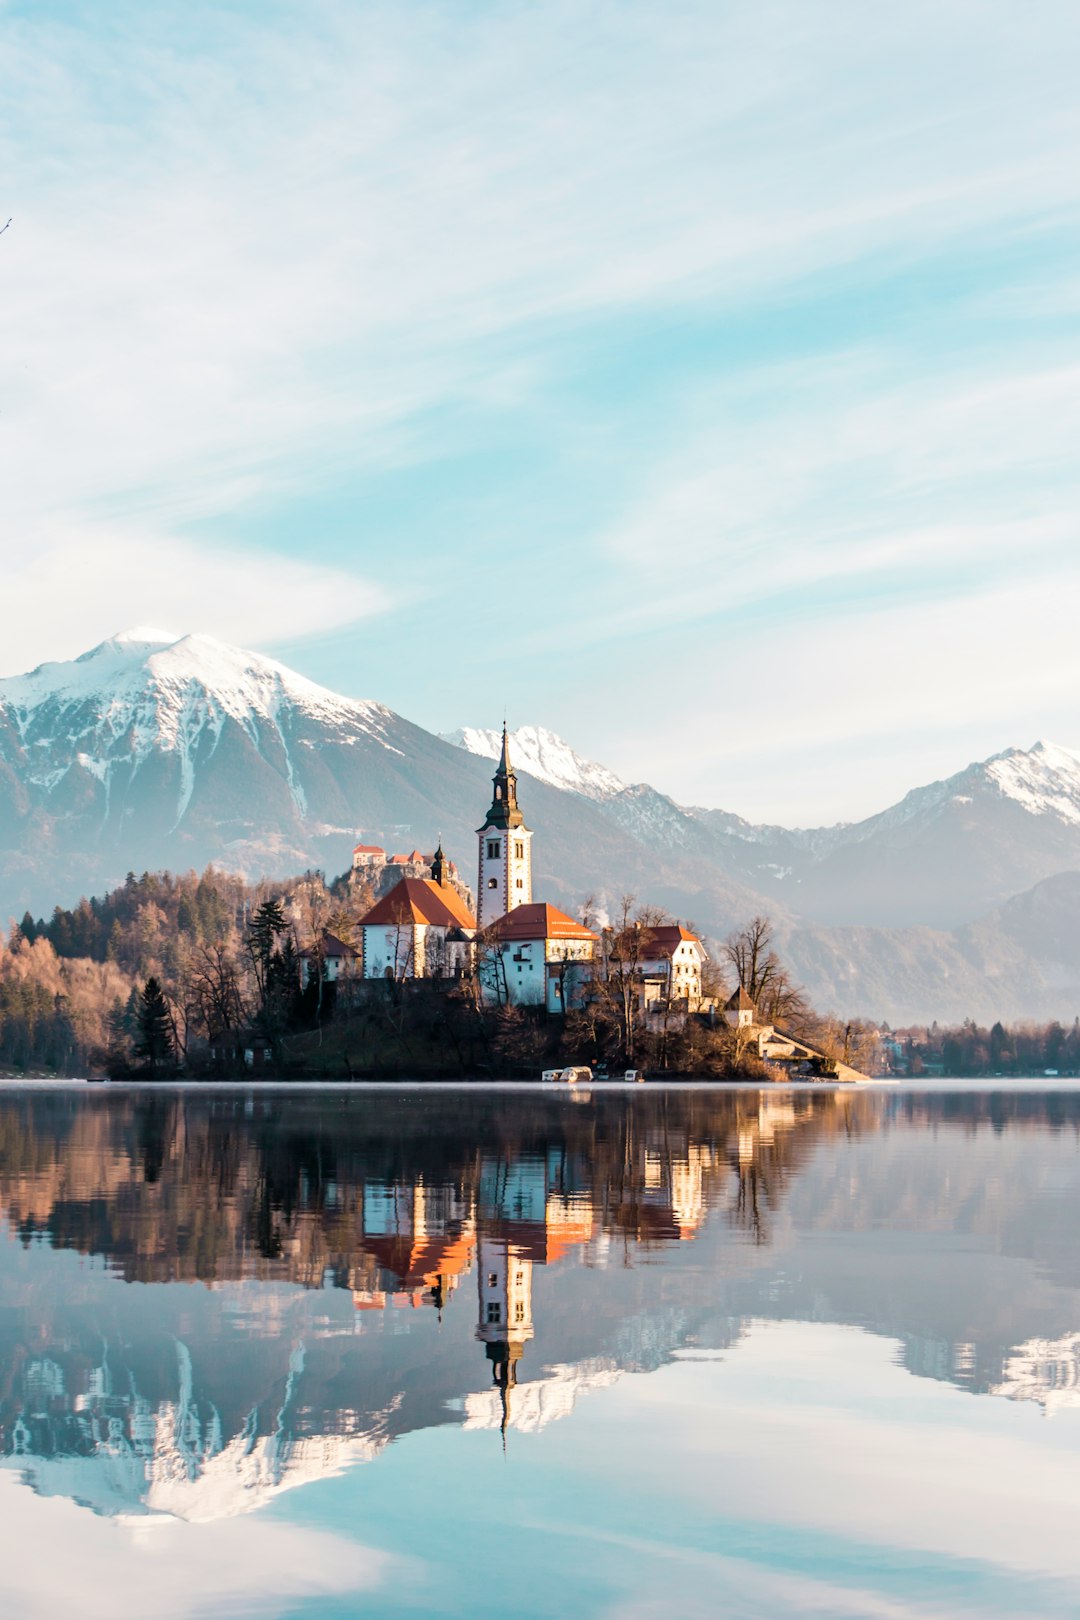 Travel Tips and Stories of Bled in Slovenia